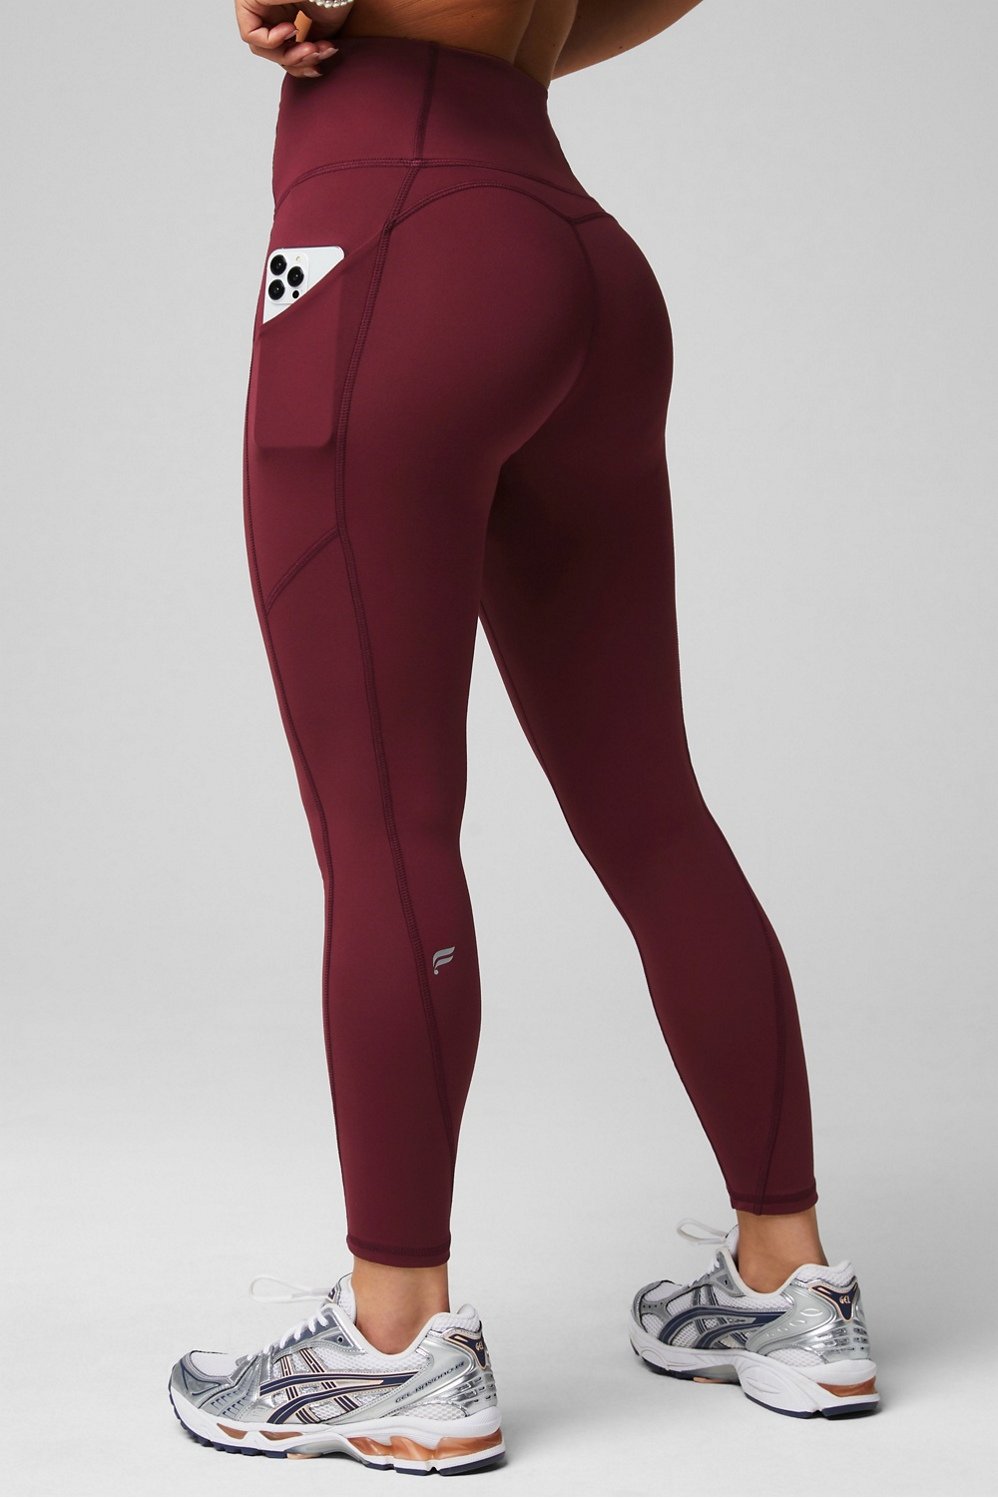 Oasis PureLuxe High-Waisted 7/8 Legging  Perfect leggings, Outfits with  leggings, Fabletics